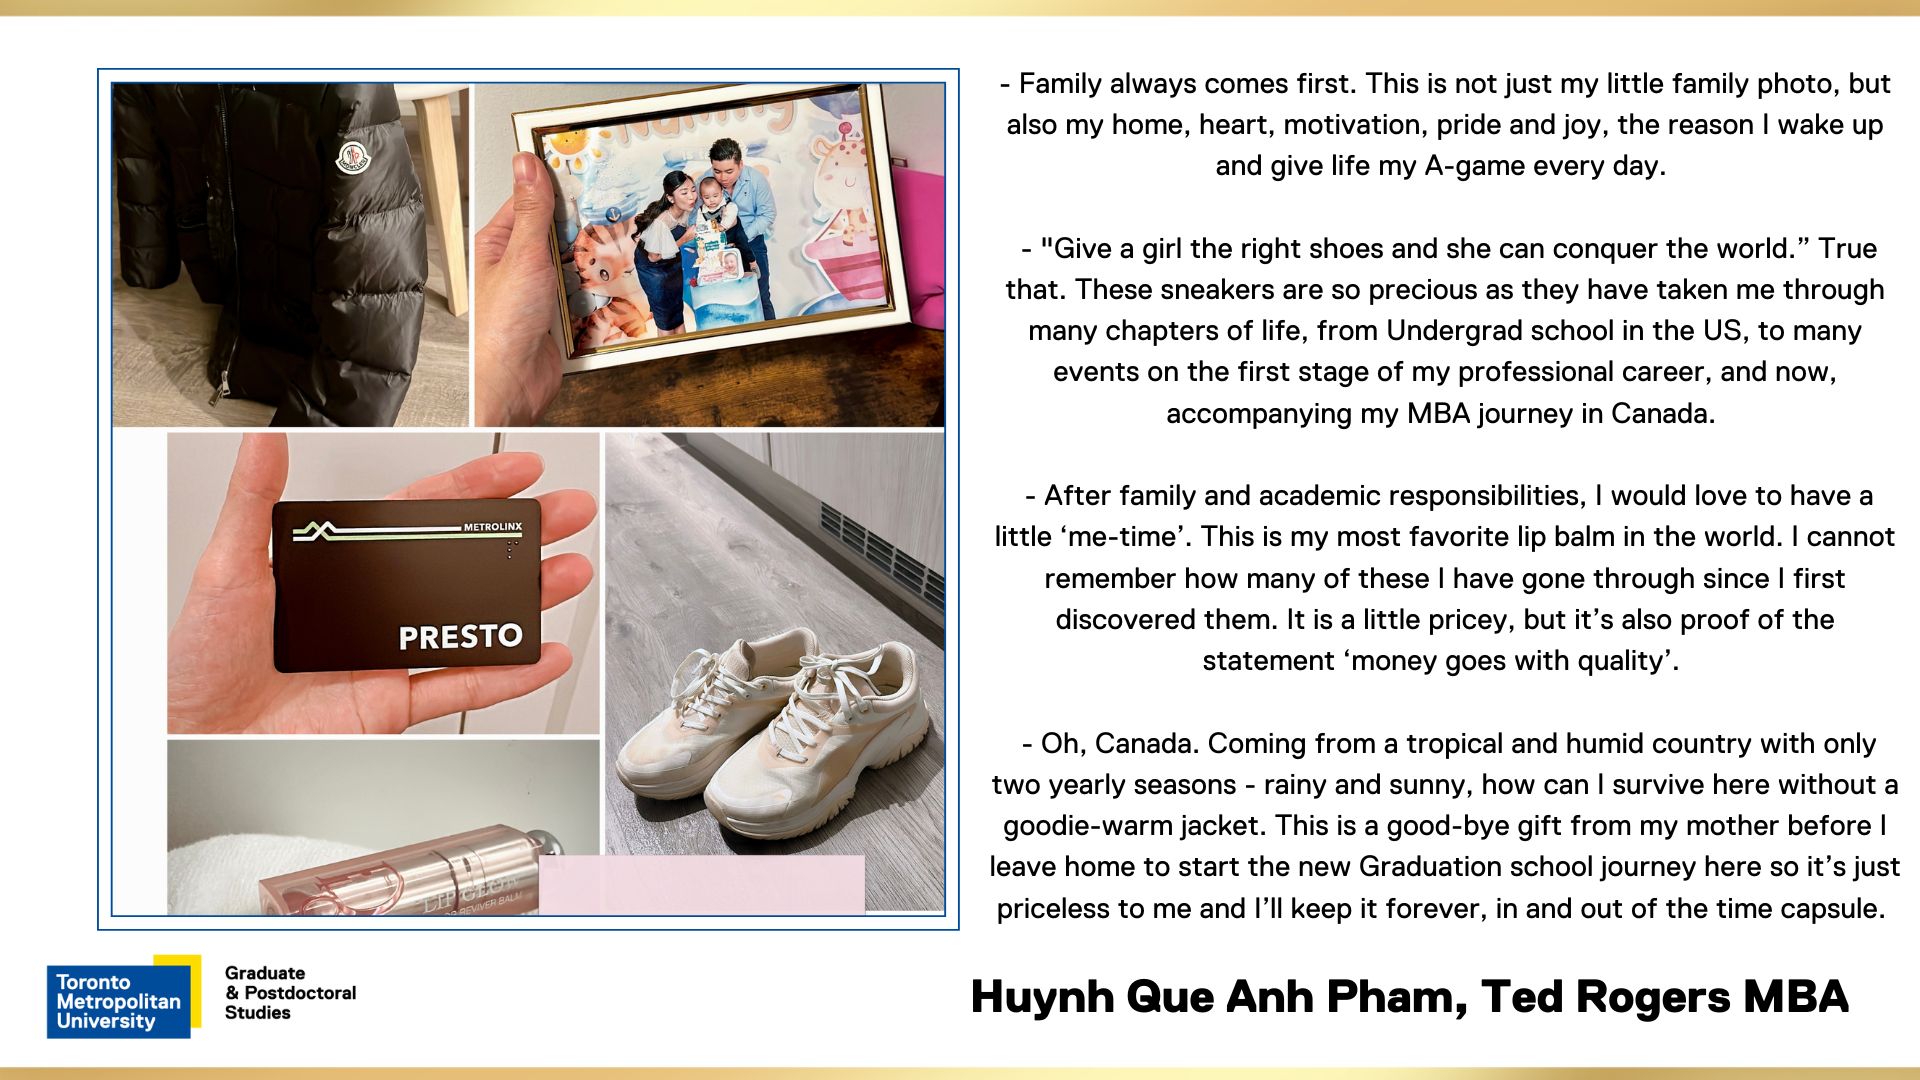 Huynh Que Anh Pham